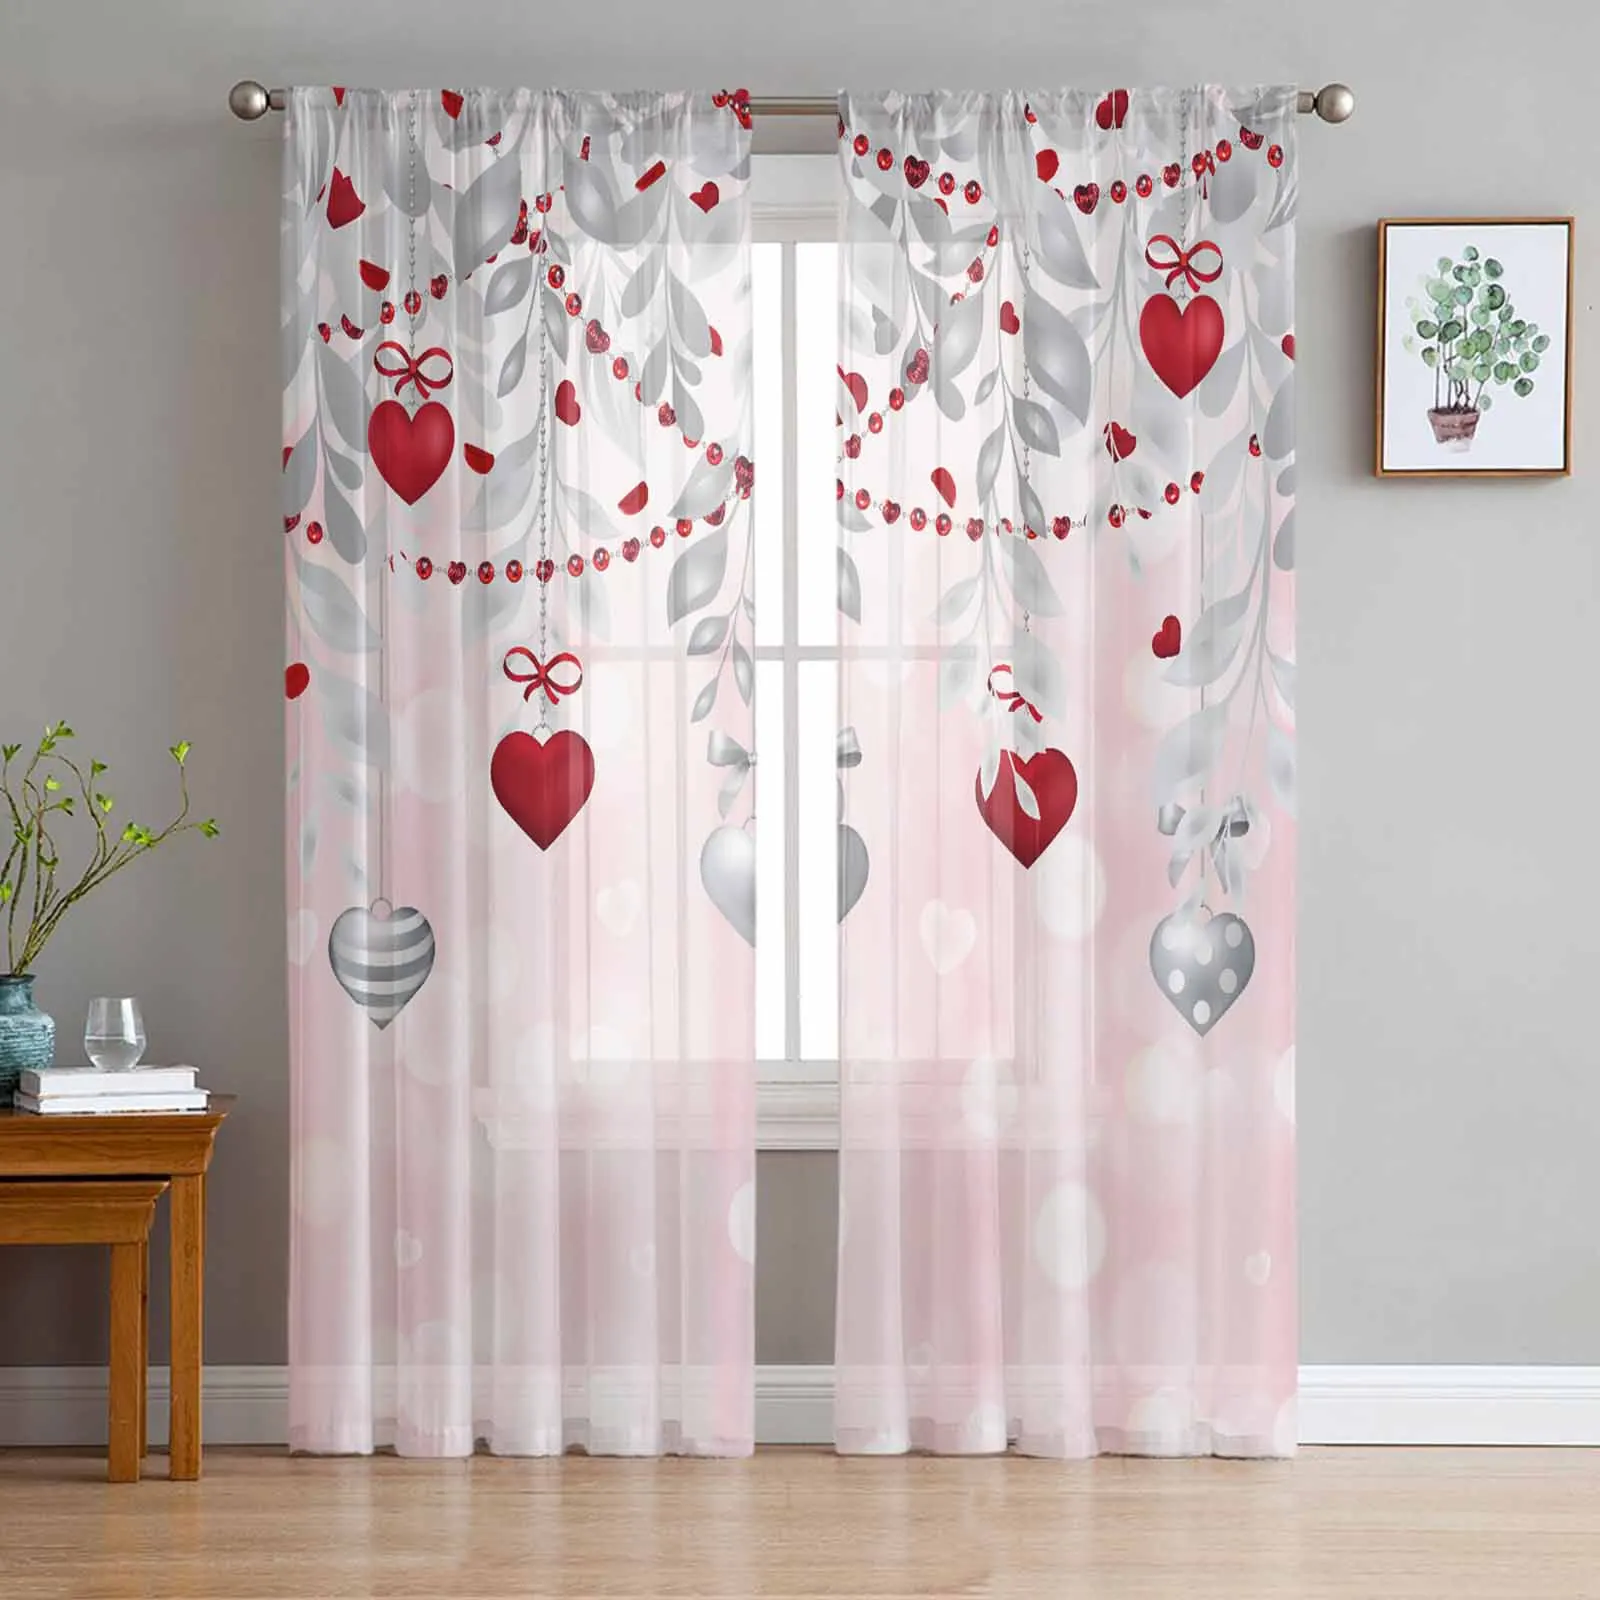 

Valentines Hearts Eucalyptus Leaves Tulle Curtains Living Room Kitchen Decoration Chiffon Window Treatments Voile Sheer Curtain